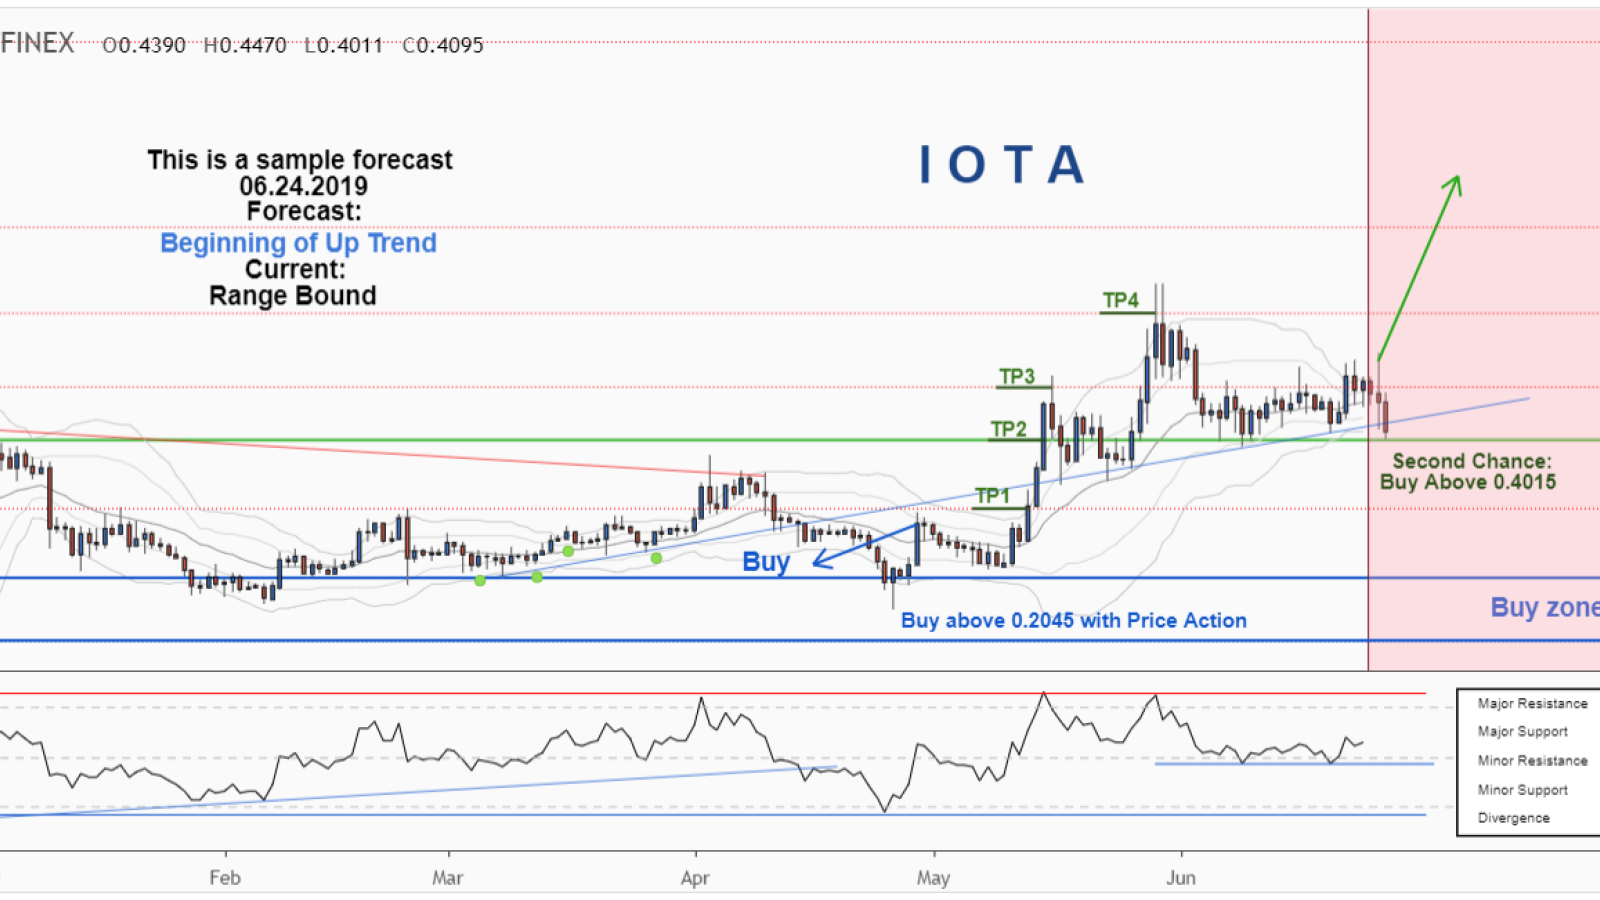 IOTA still holds on the support line